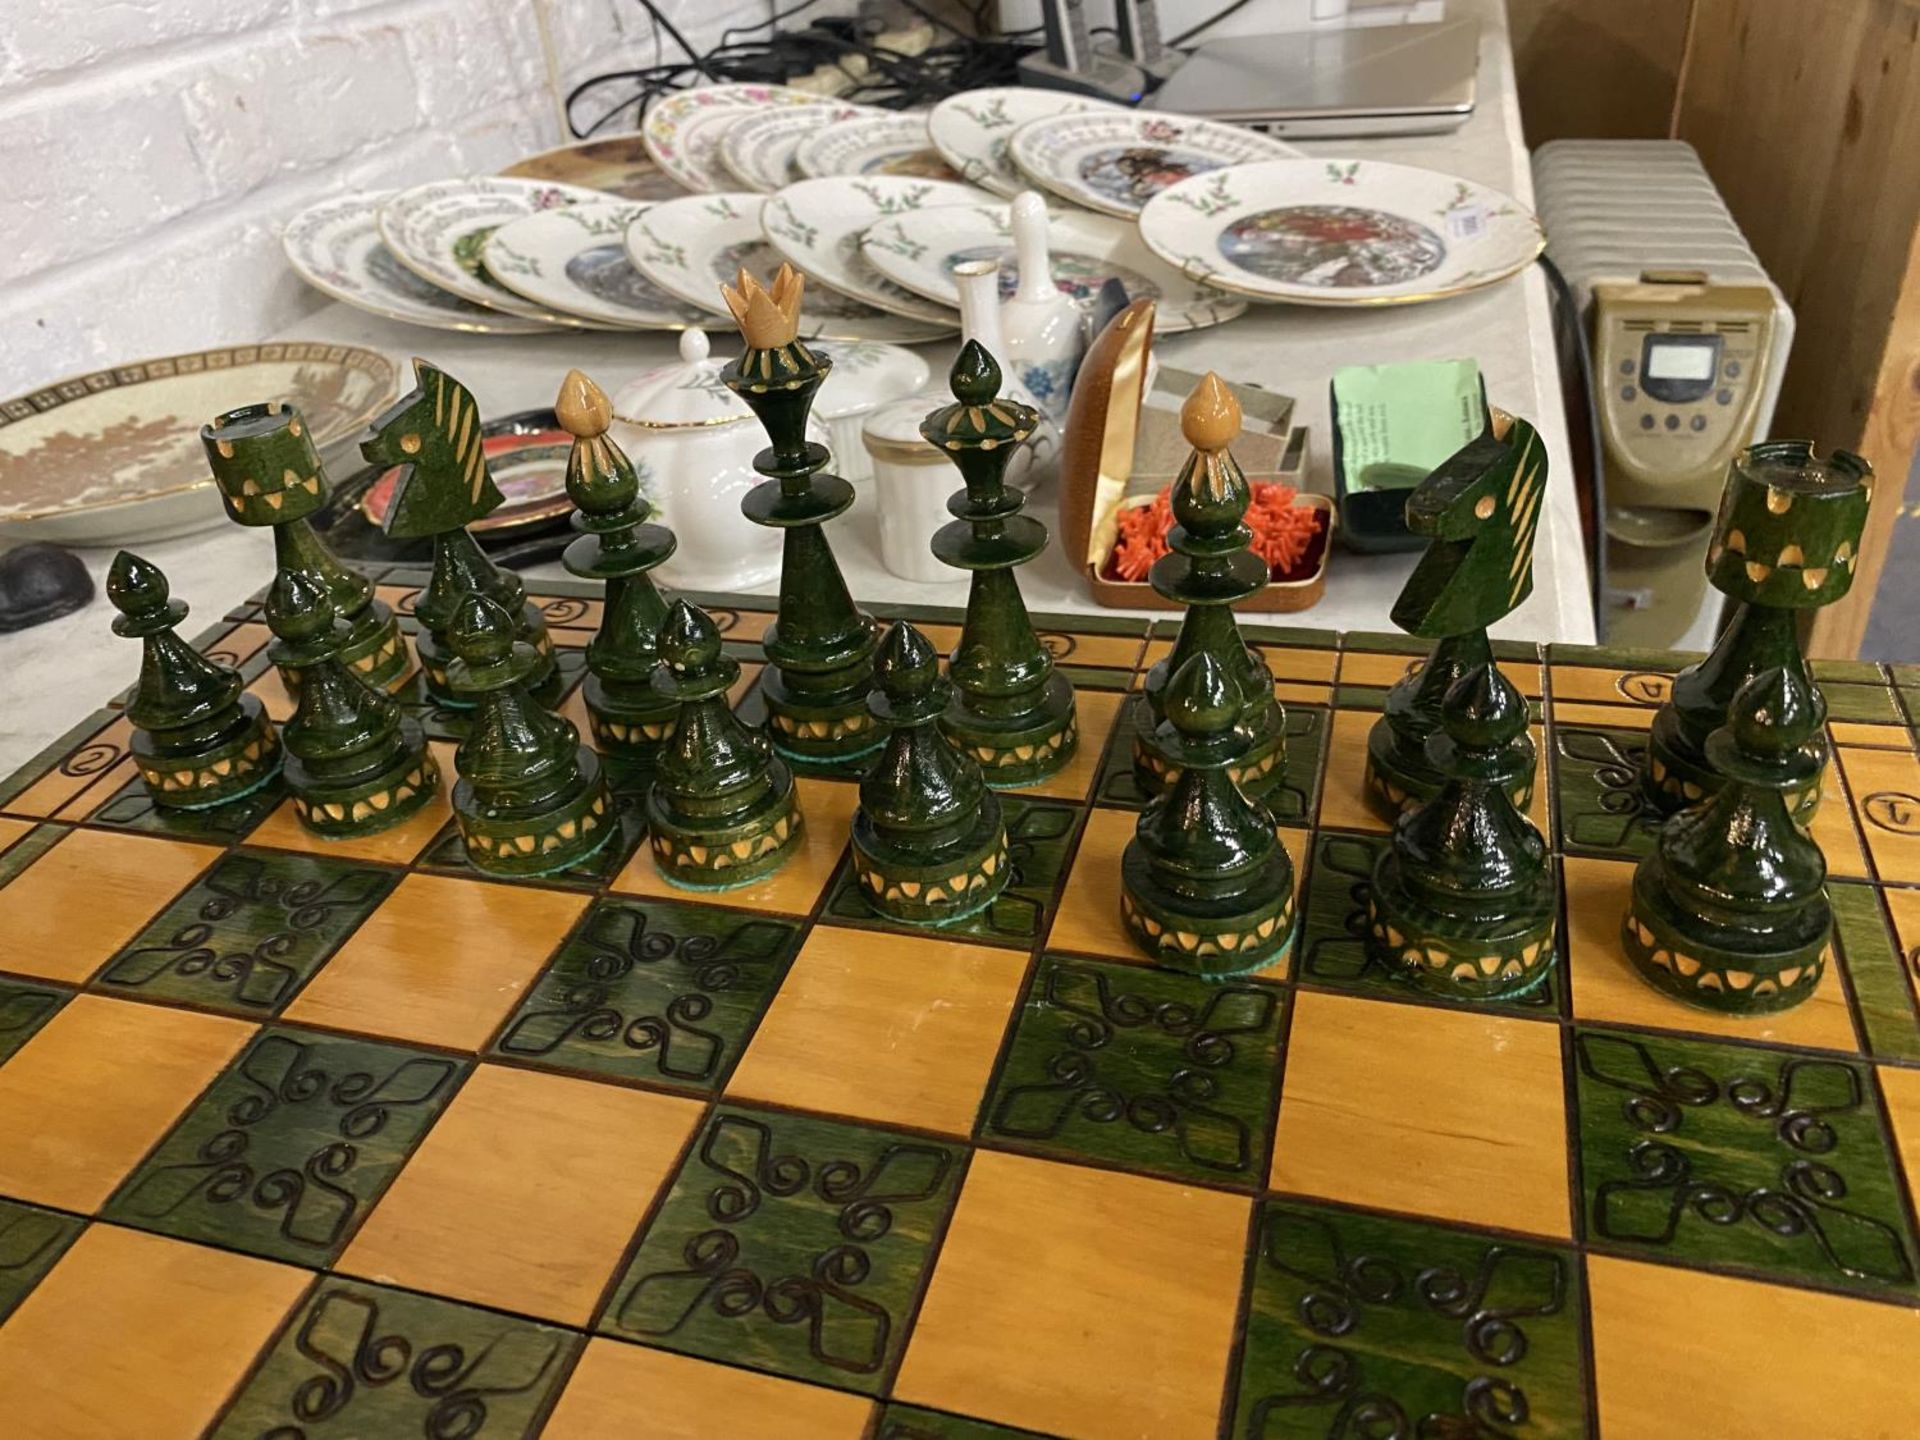 A GREEN AND WHITE WOODEN CHESS SET AND PIECES WHICH FOLDS AWAY